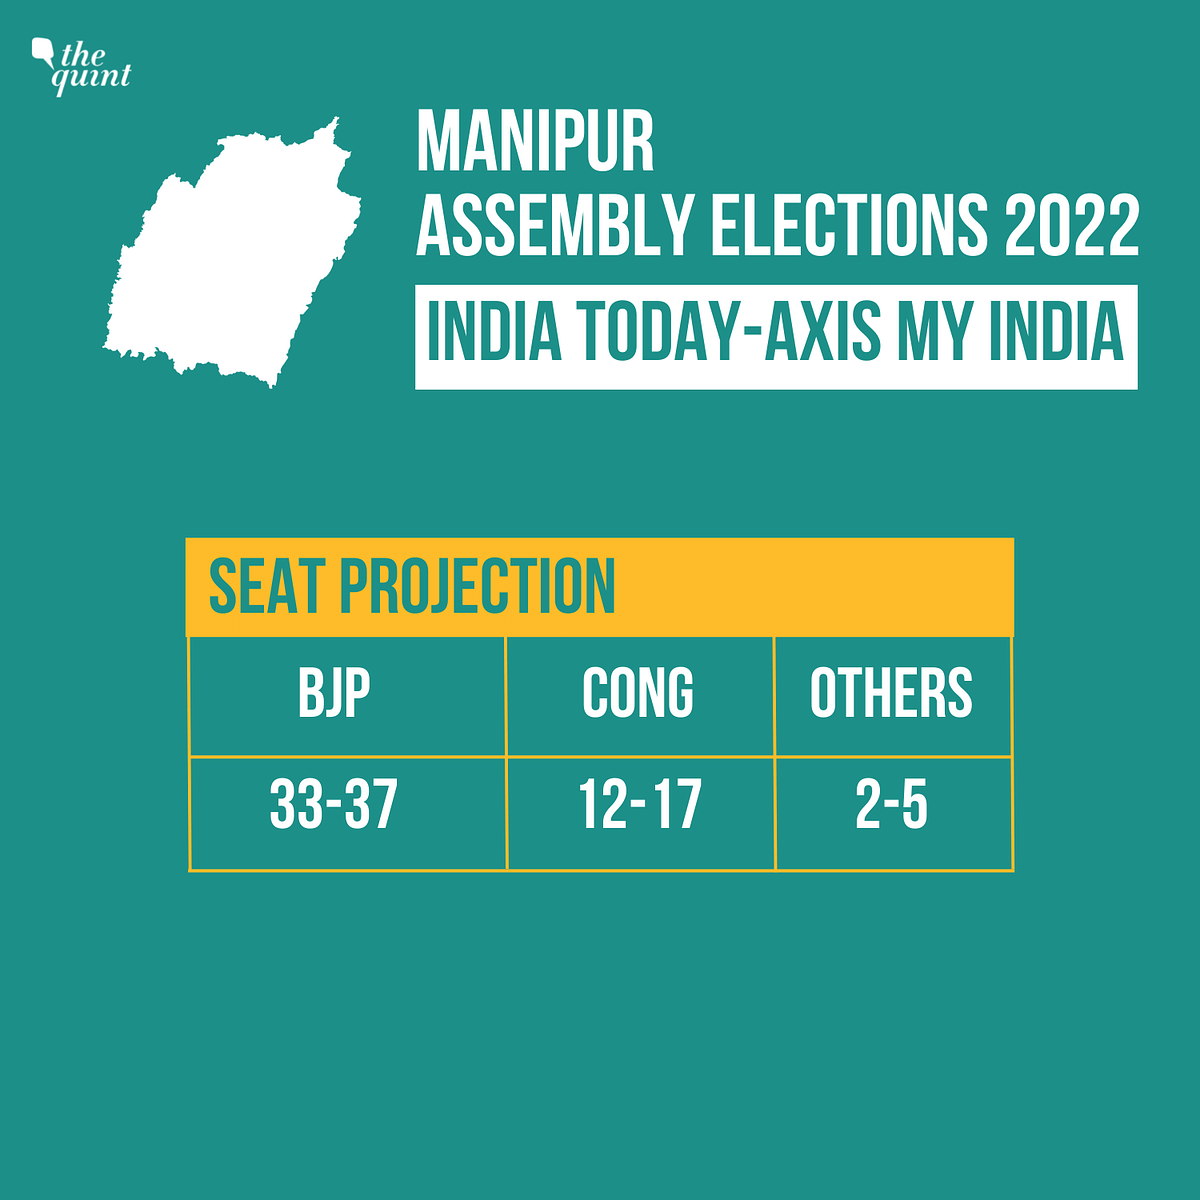 Catch the exit poll results for Manipur Assembly elections here.